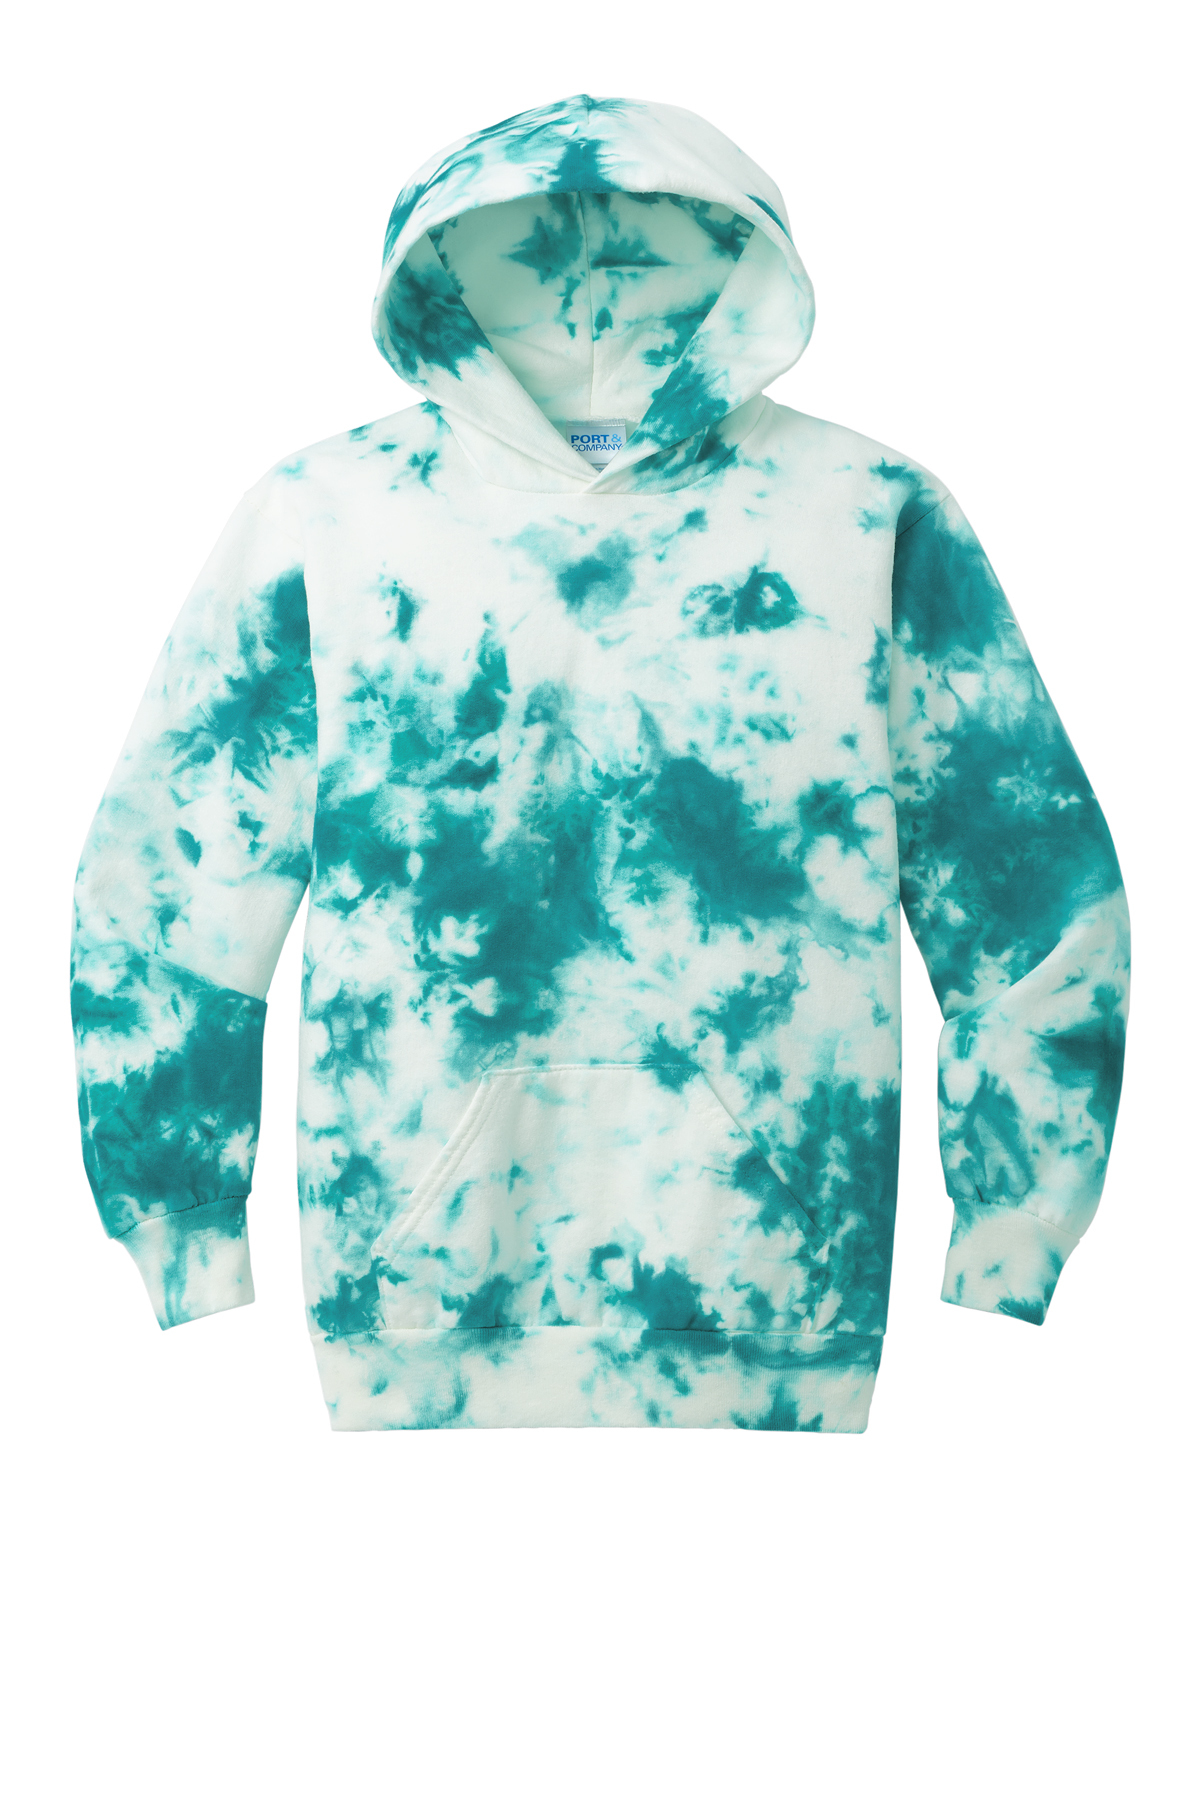 Port & Company Youth Crystal Tie-Dye Pullover Hoodie | Product | SanMar